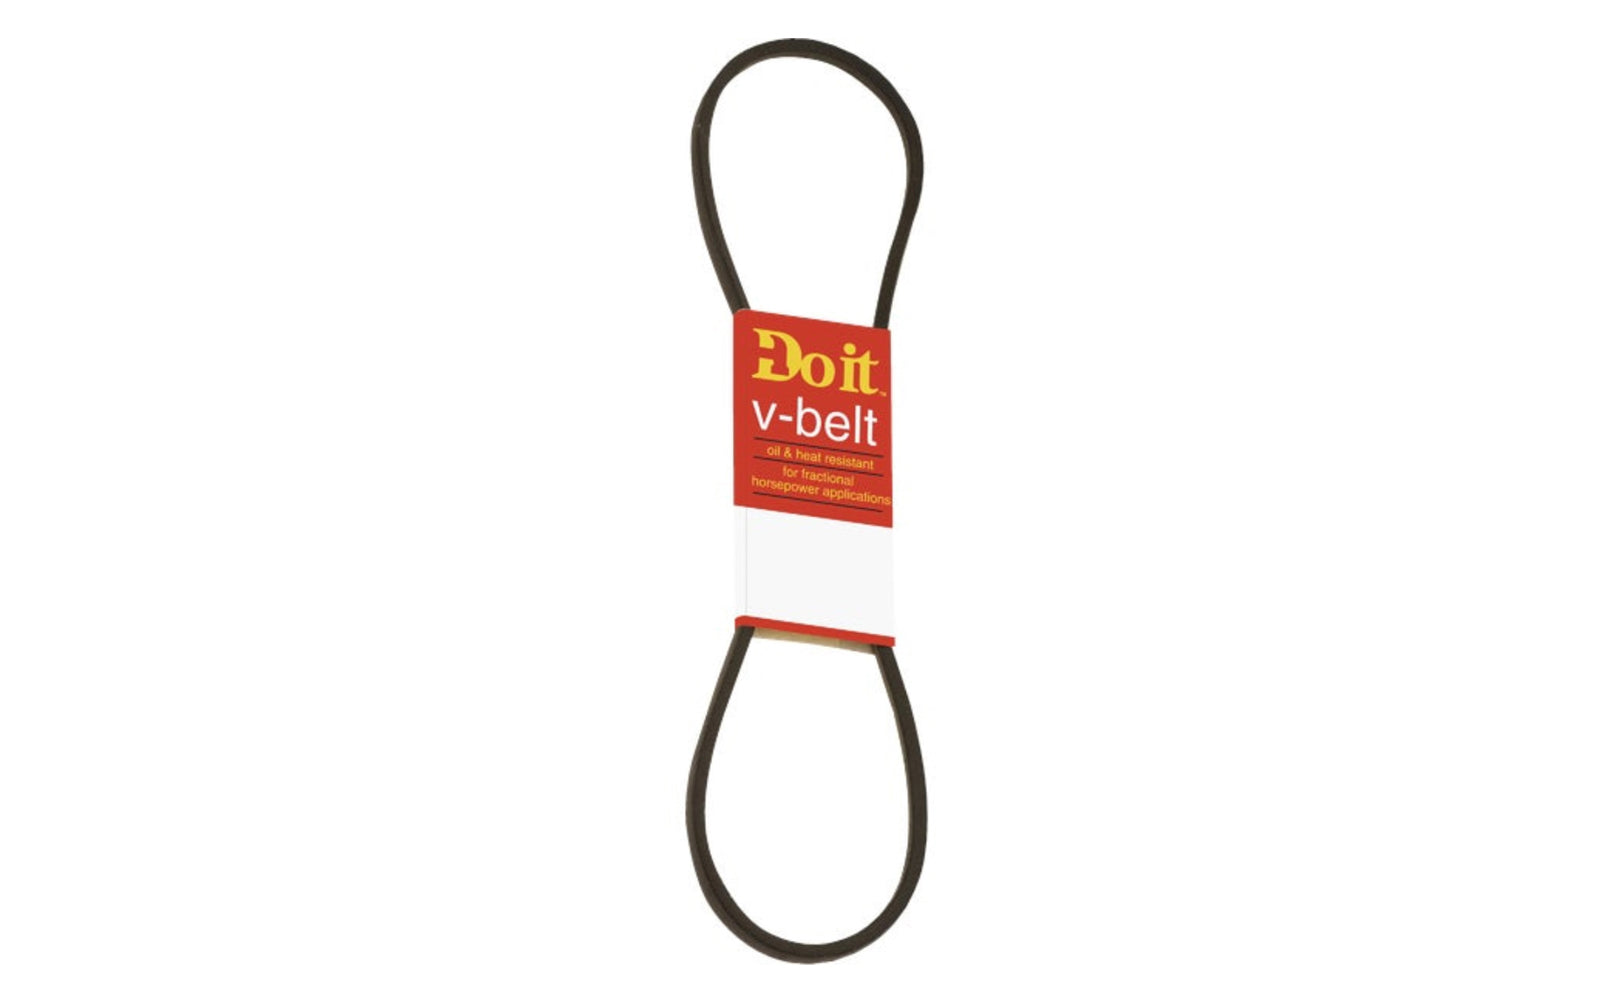 38" Long x 1/2" Width V-Belt - 4L380. Rubber V-Belt. Oil & heat resistant. Recommended for 1-3 HP (horsepower) light-duty applications. Typically the best option for electric powered applications. For refrigerators, washing machines, pumps, stokers, woodworking machines. Pulley type: A-Pulley.